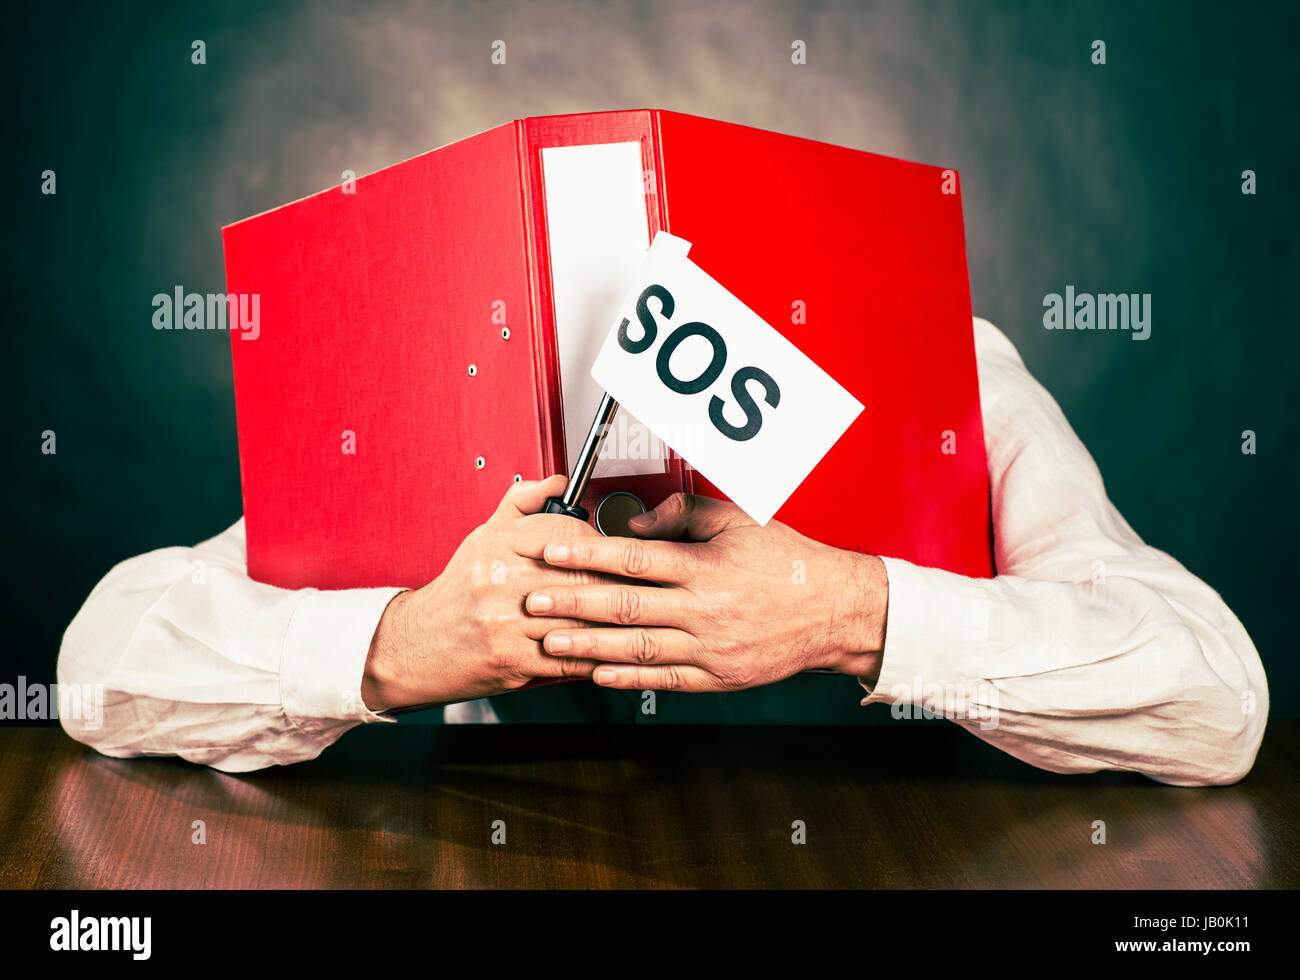 An employee hides his face behind a red file folder, holding an SOS flag in his hand. Stock Photo